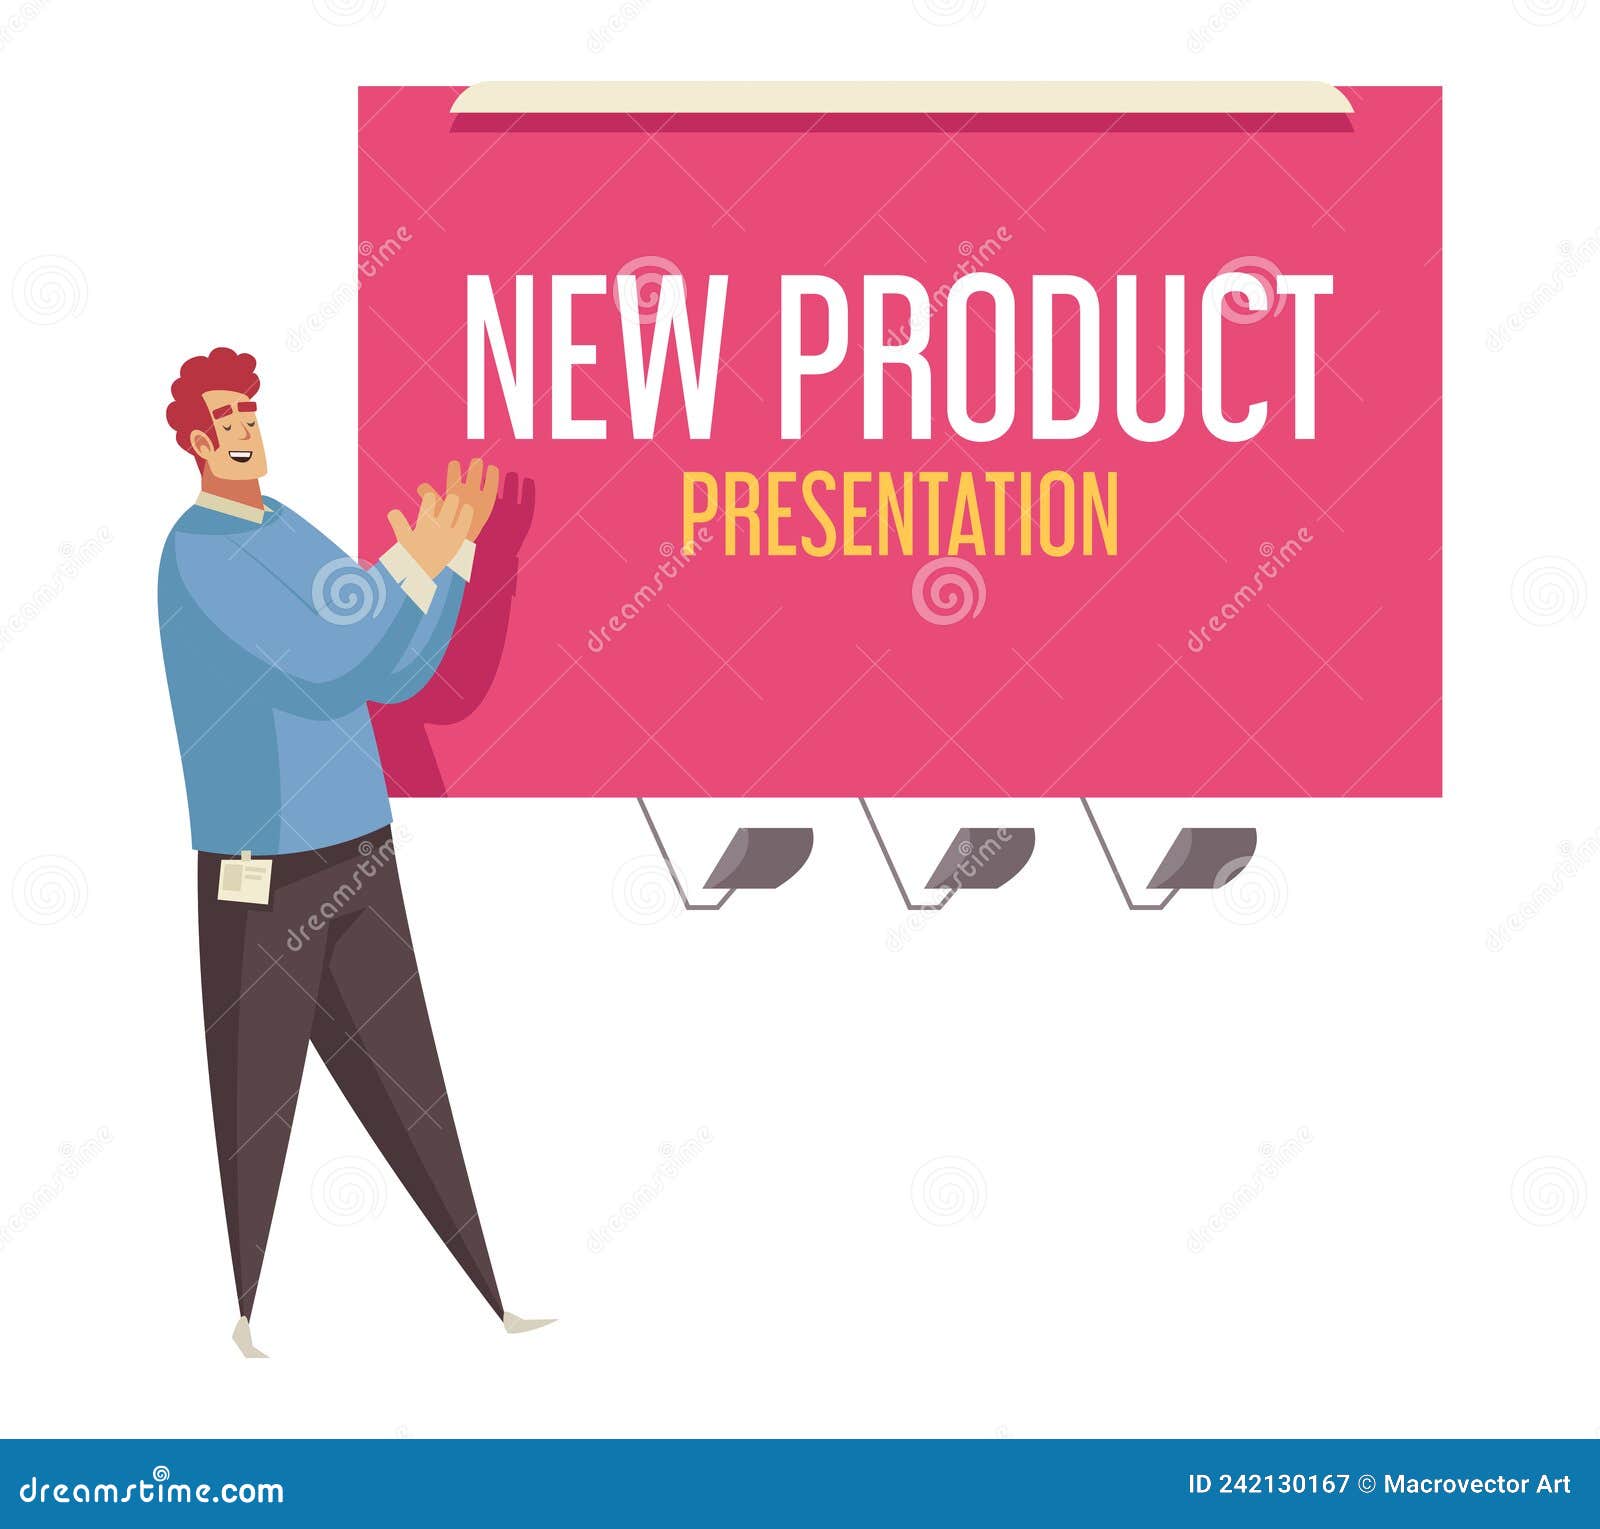 give product presentation